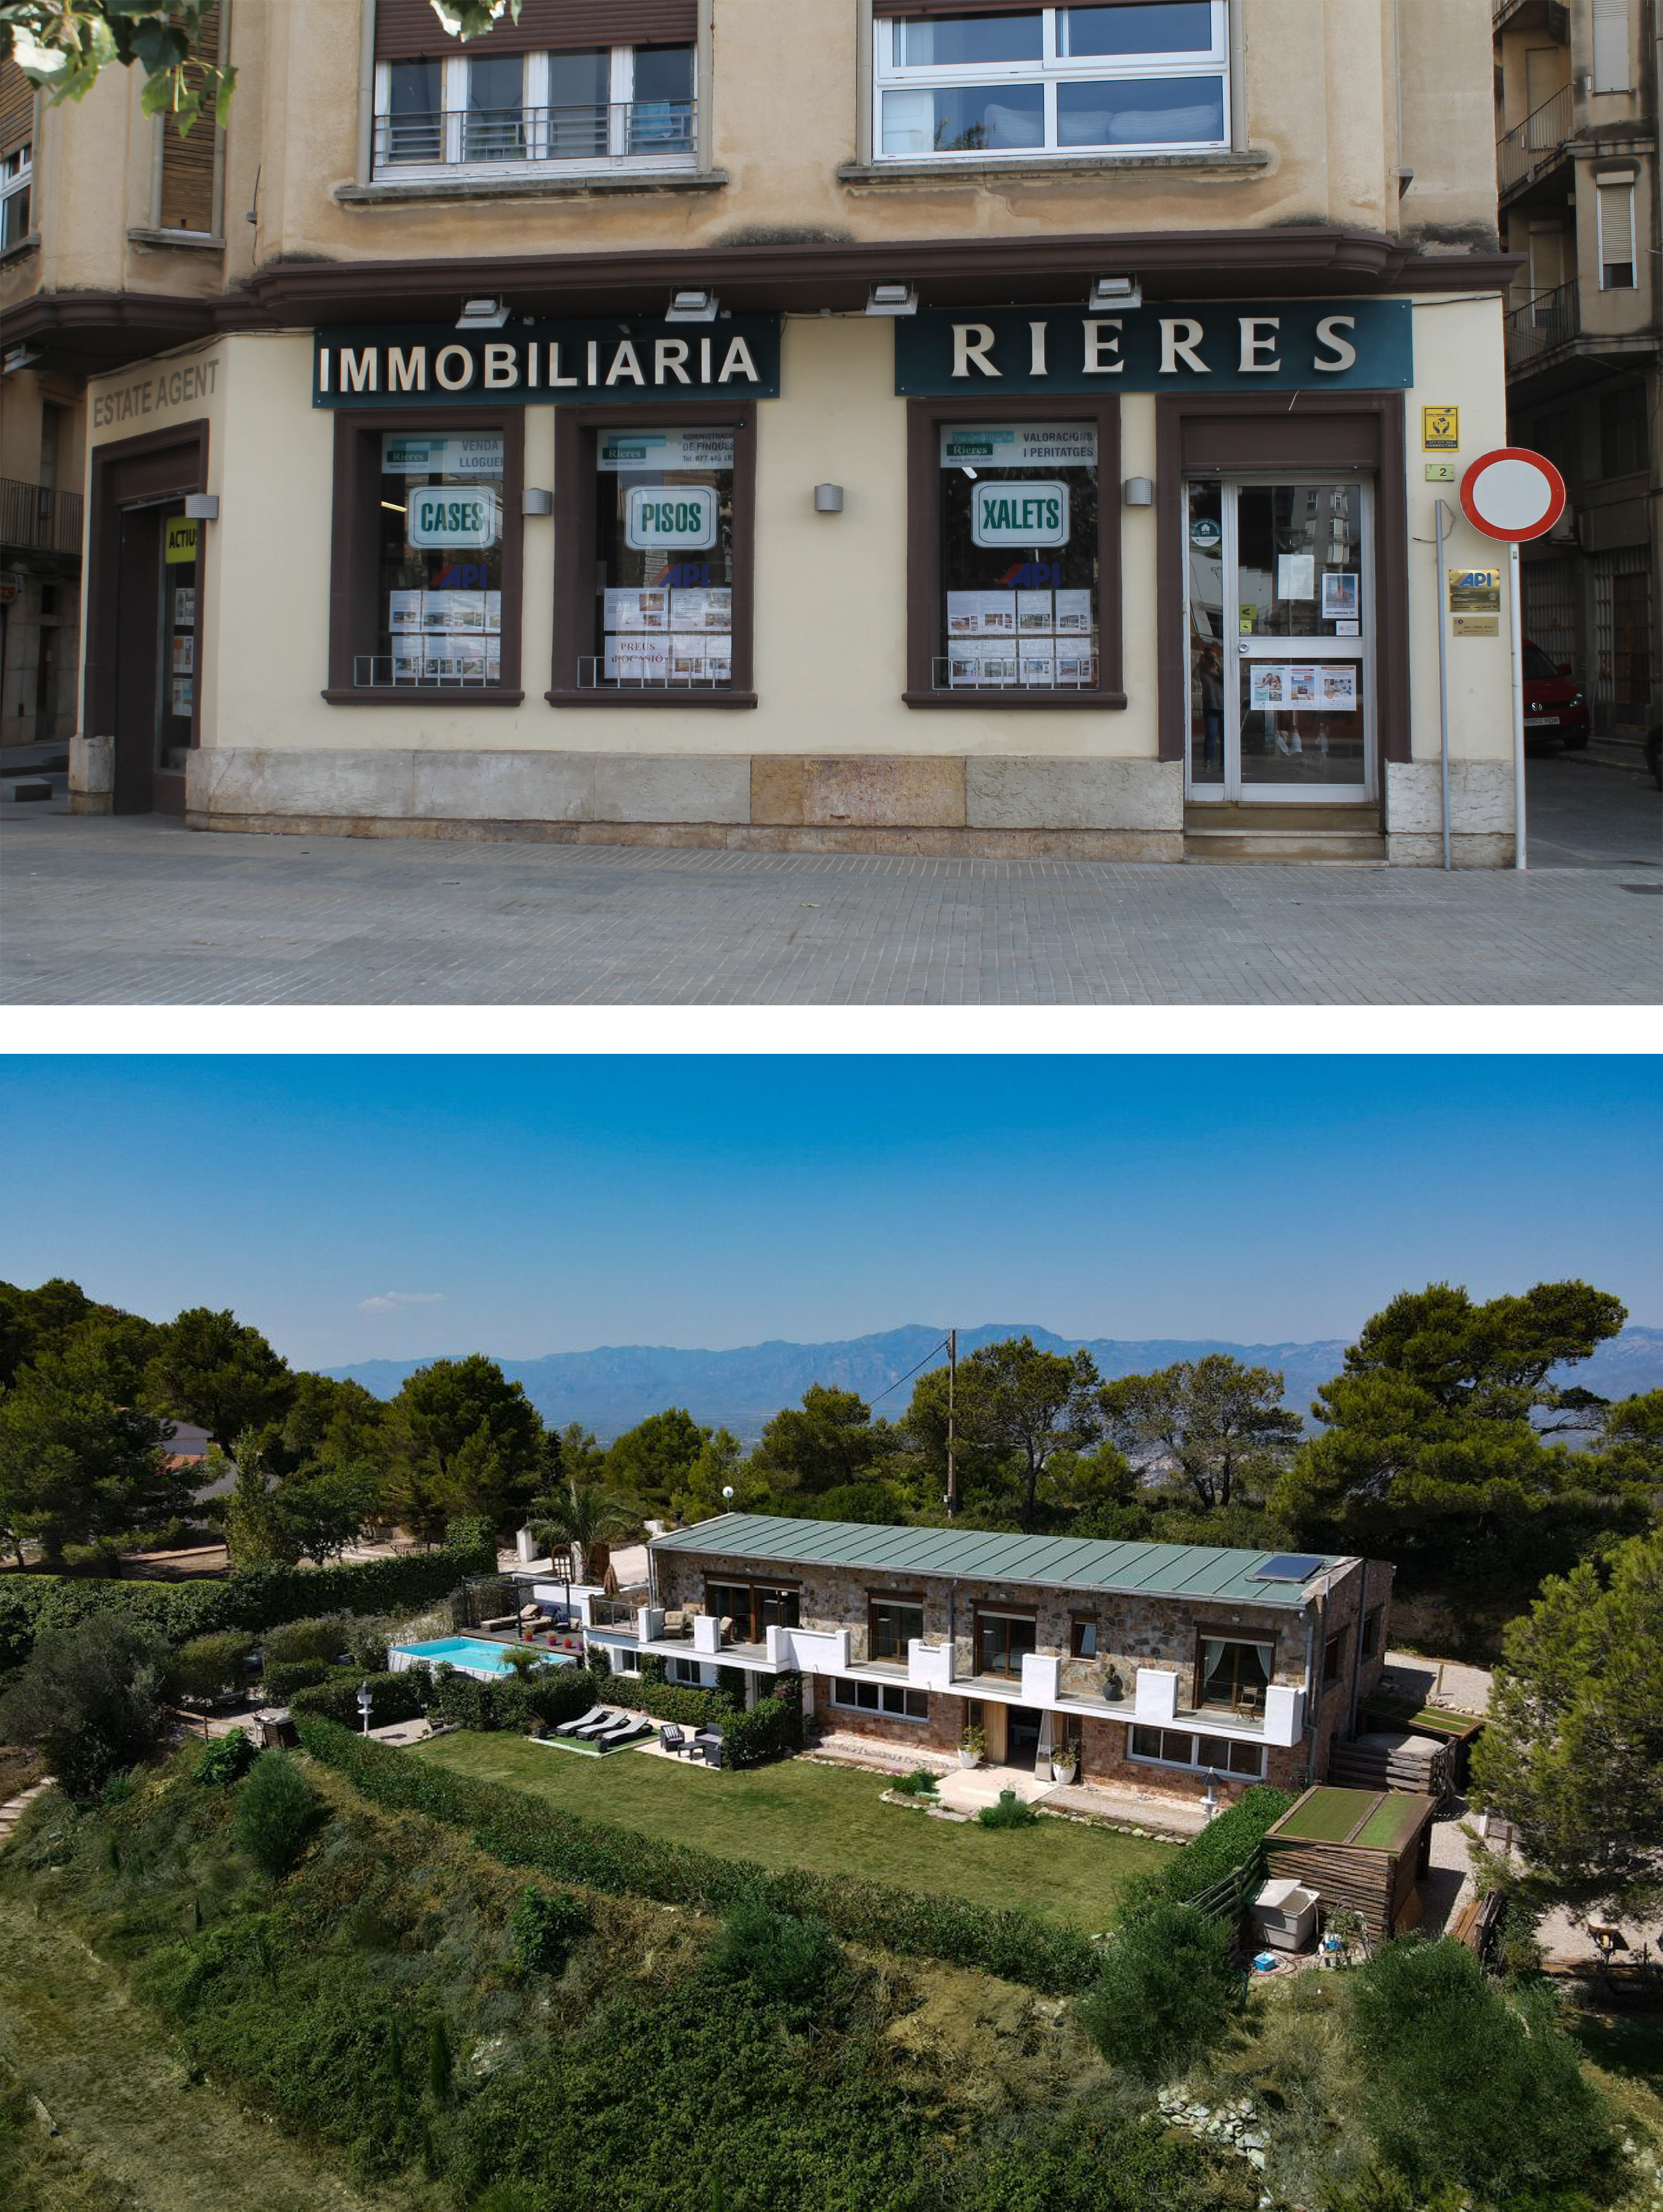 About us. IMMOBILIARIA RIERES en Tortosa